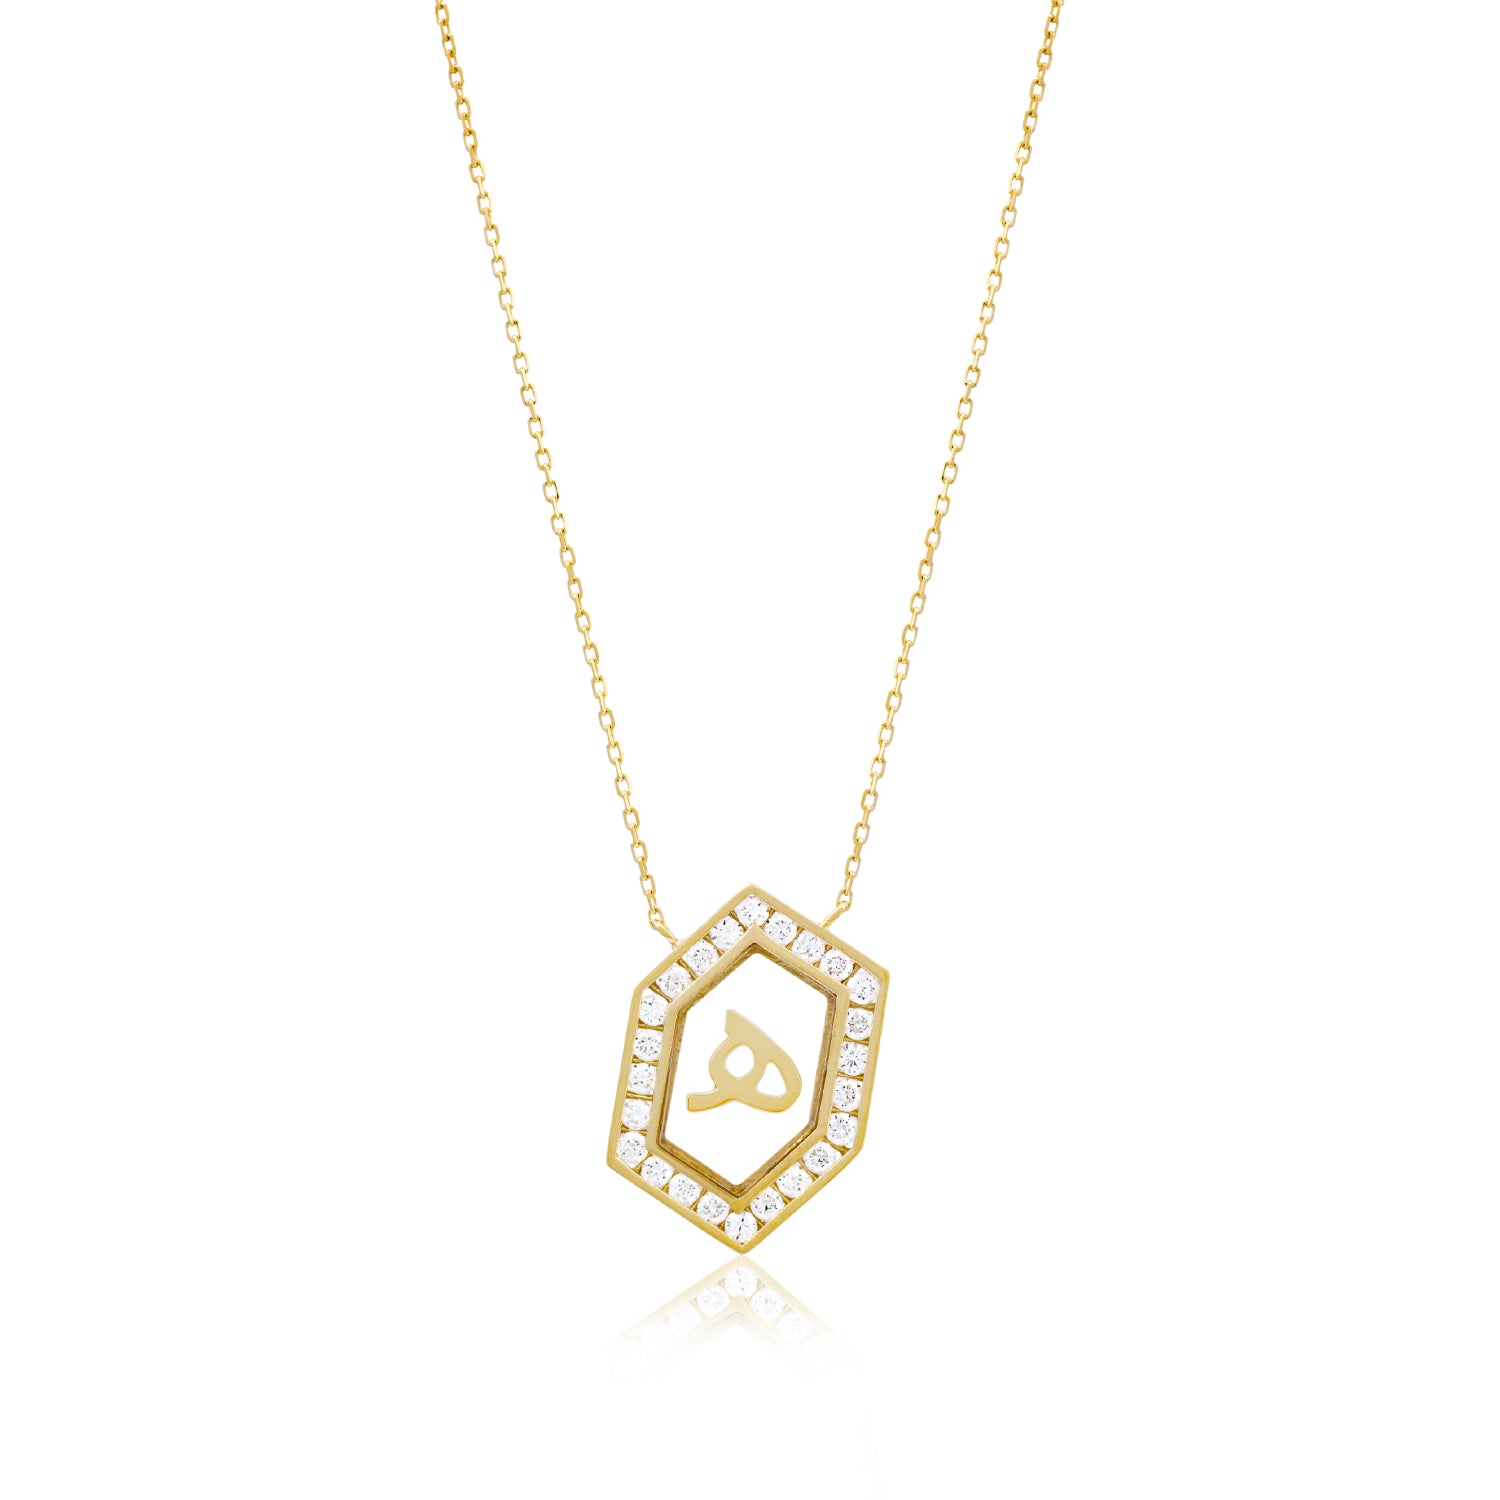 Qamoos 1.0 Letter هـ Diamond Necklace in Yellow Gold